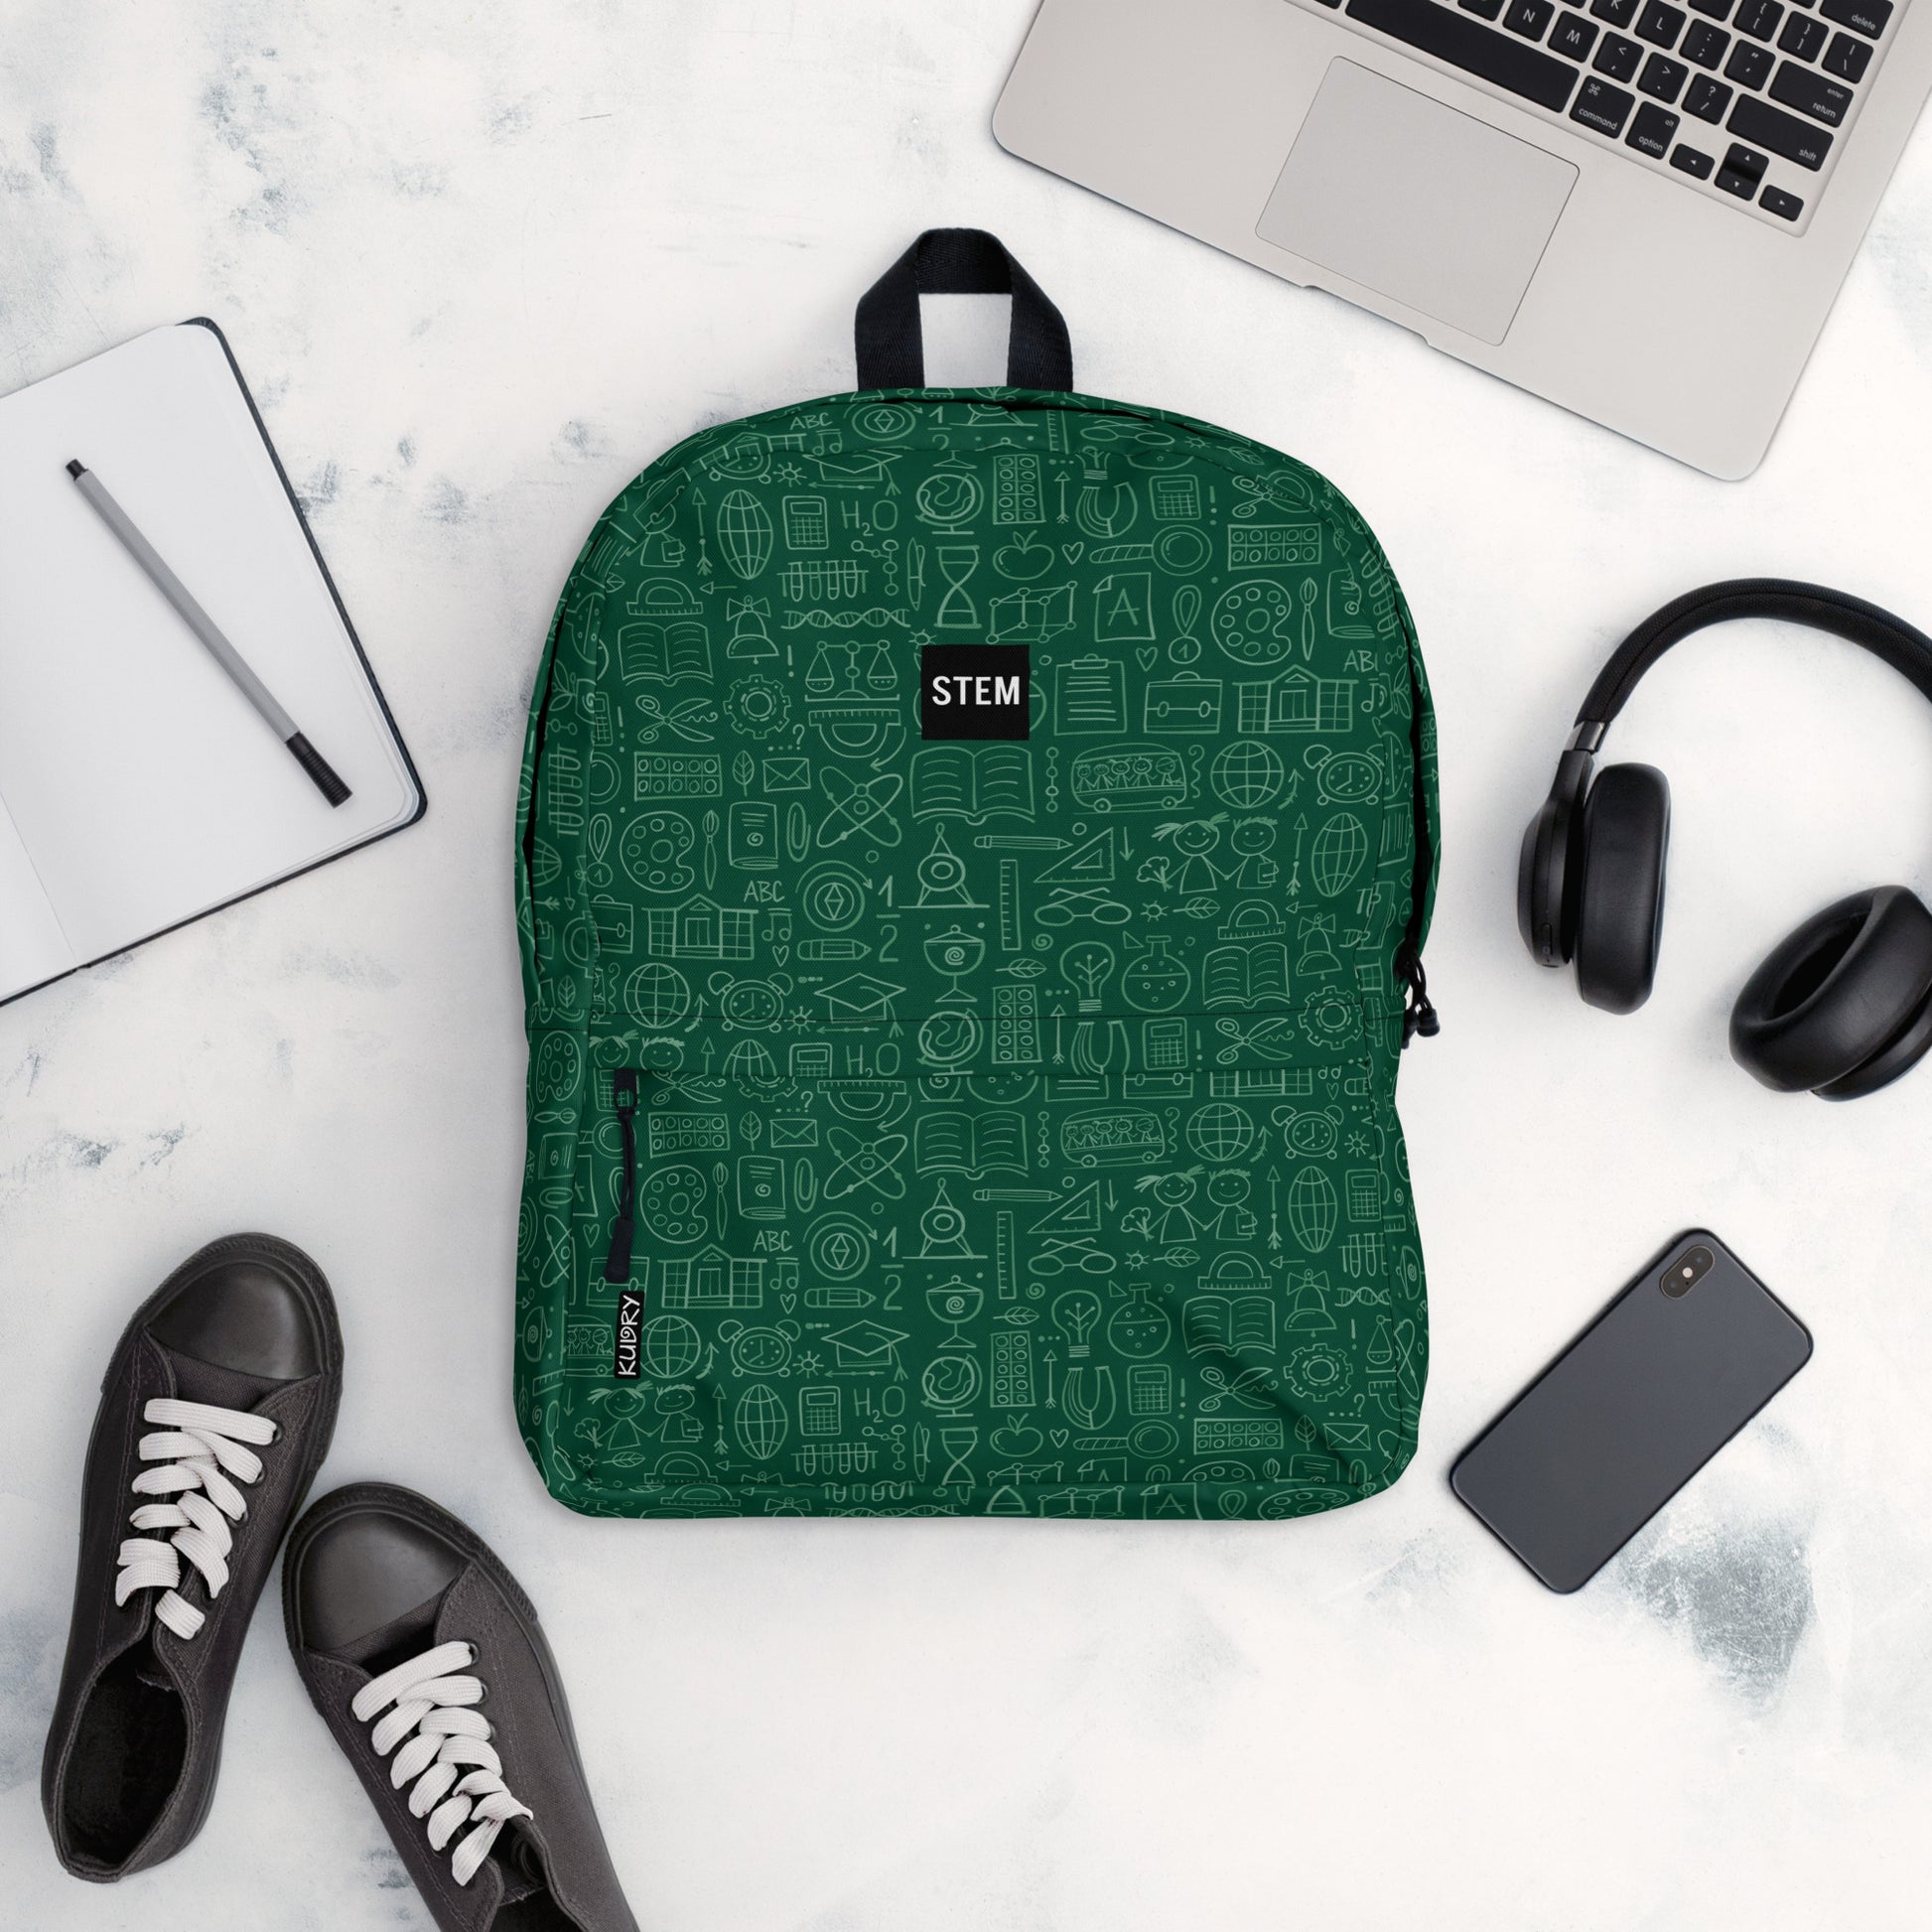 Personalised School Backpack , dark green color,and accessories on table, STEM-themed, stylish designer print